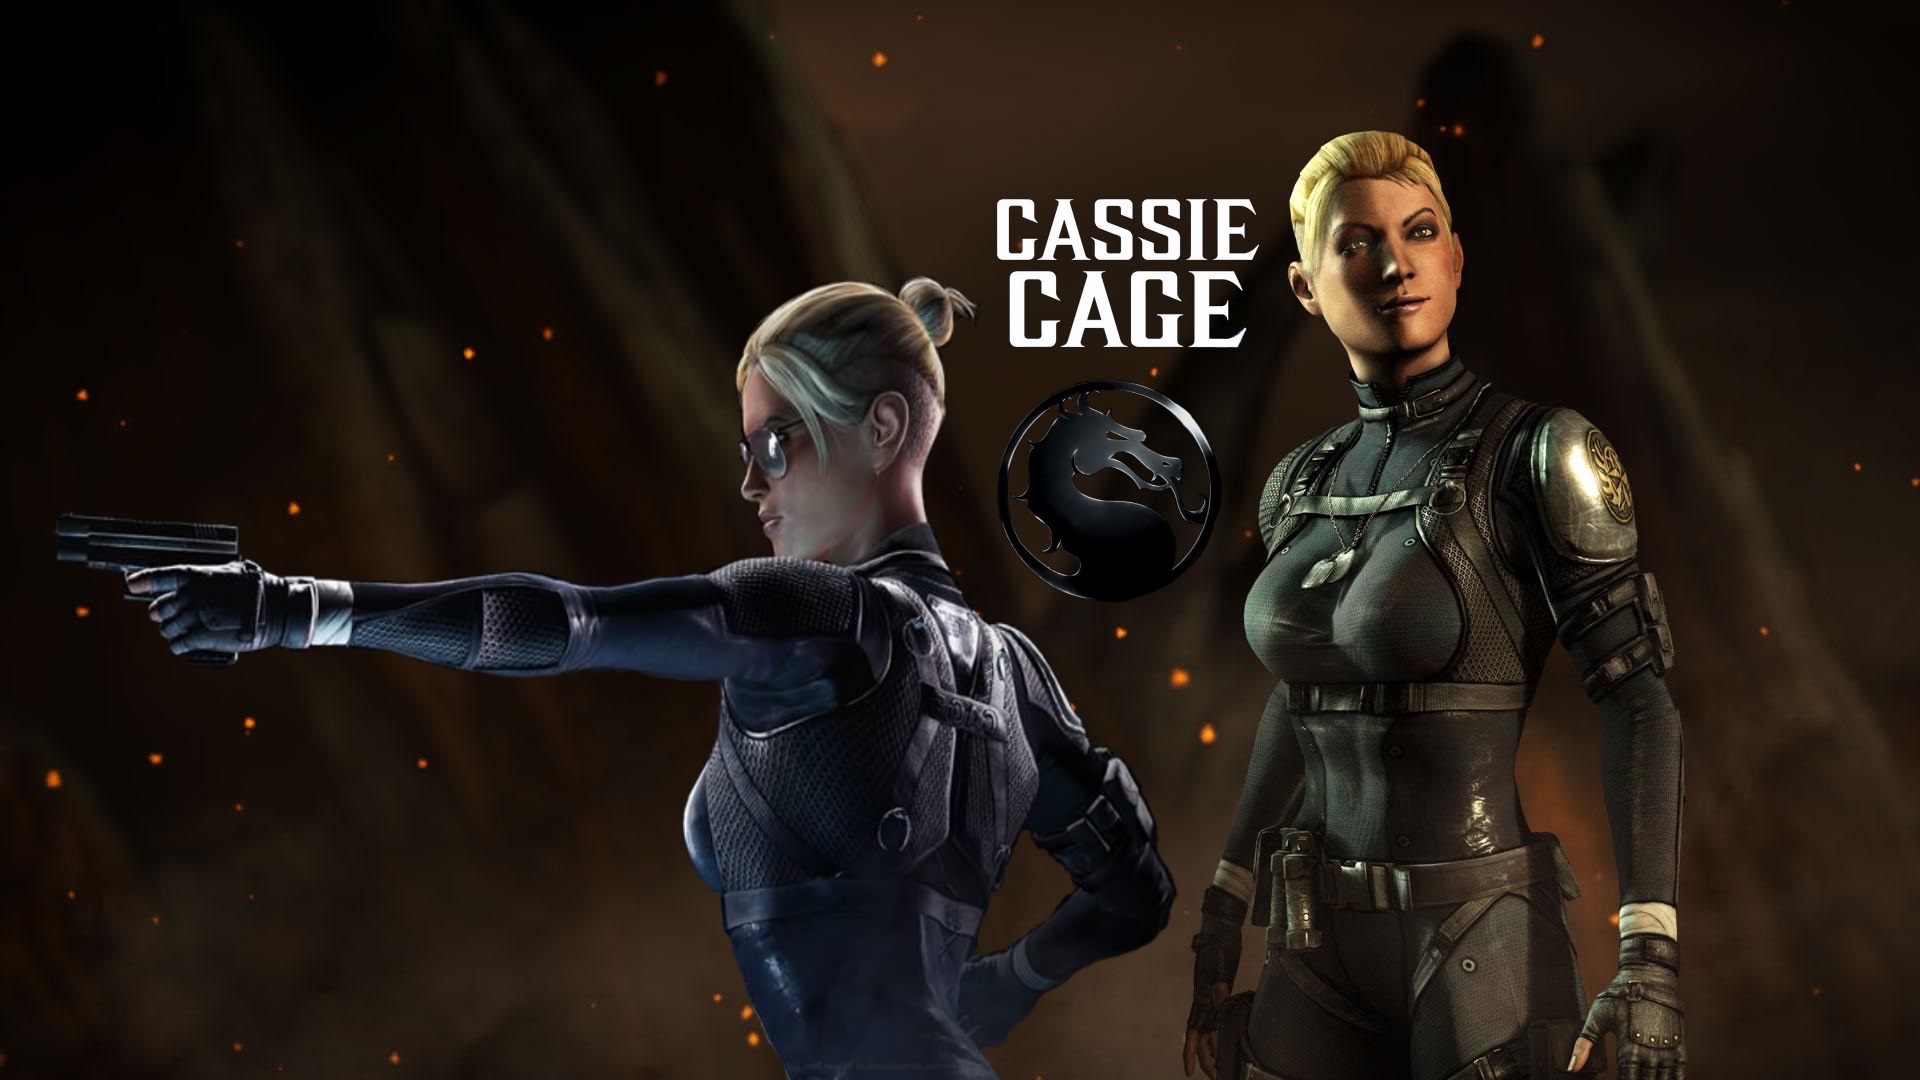 mkx_cassie_cage_edit_by_wildfire8511-d8lruo9.jpg